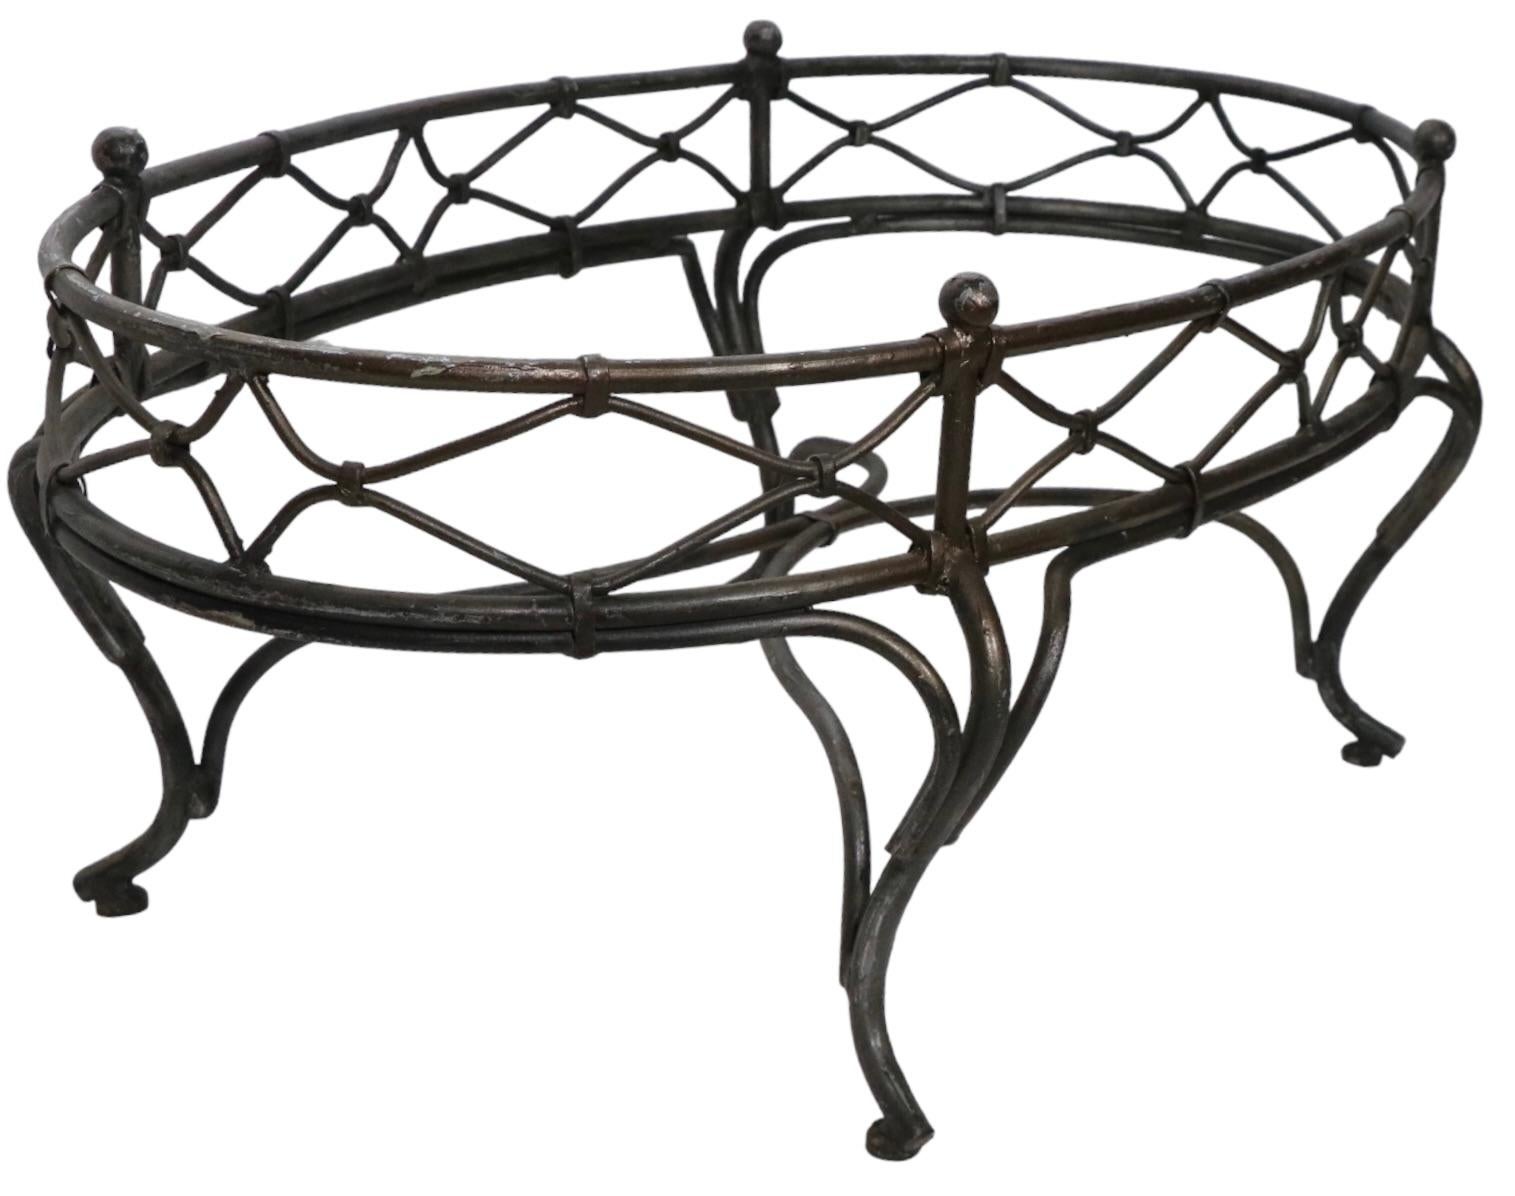 Neoclassical Revival Wrought Iron Table Base Suitable for Indoor or Outdoor Use